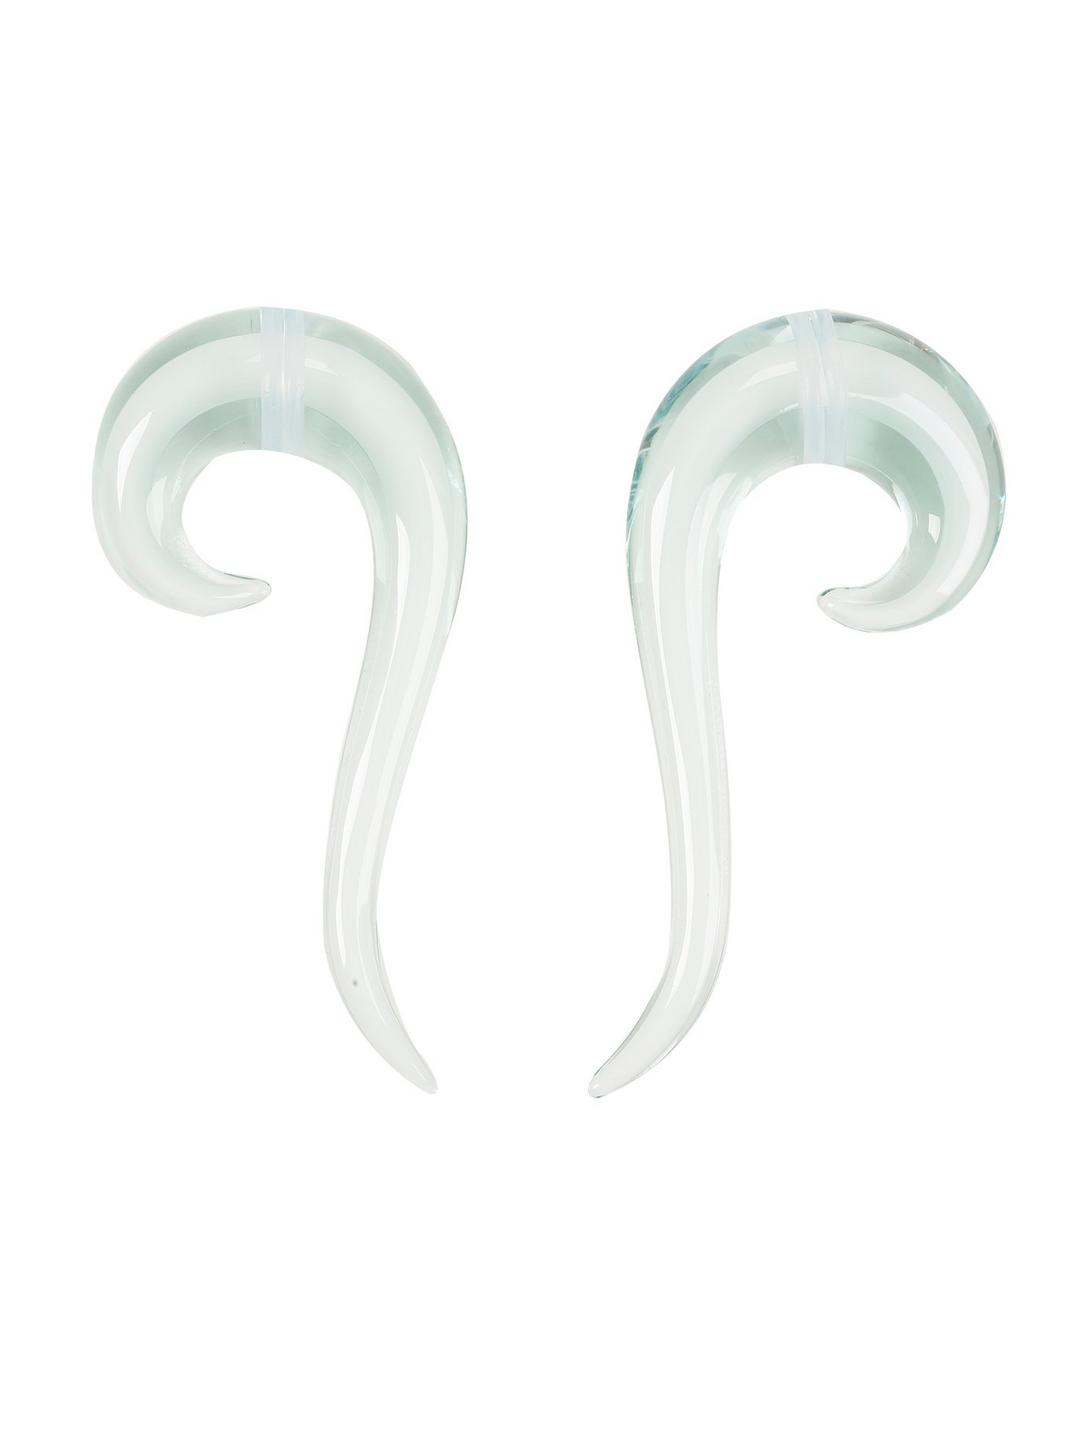 Glass White Center Clear Spiral Pincher 2 Pack, WHITE, hi-res